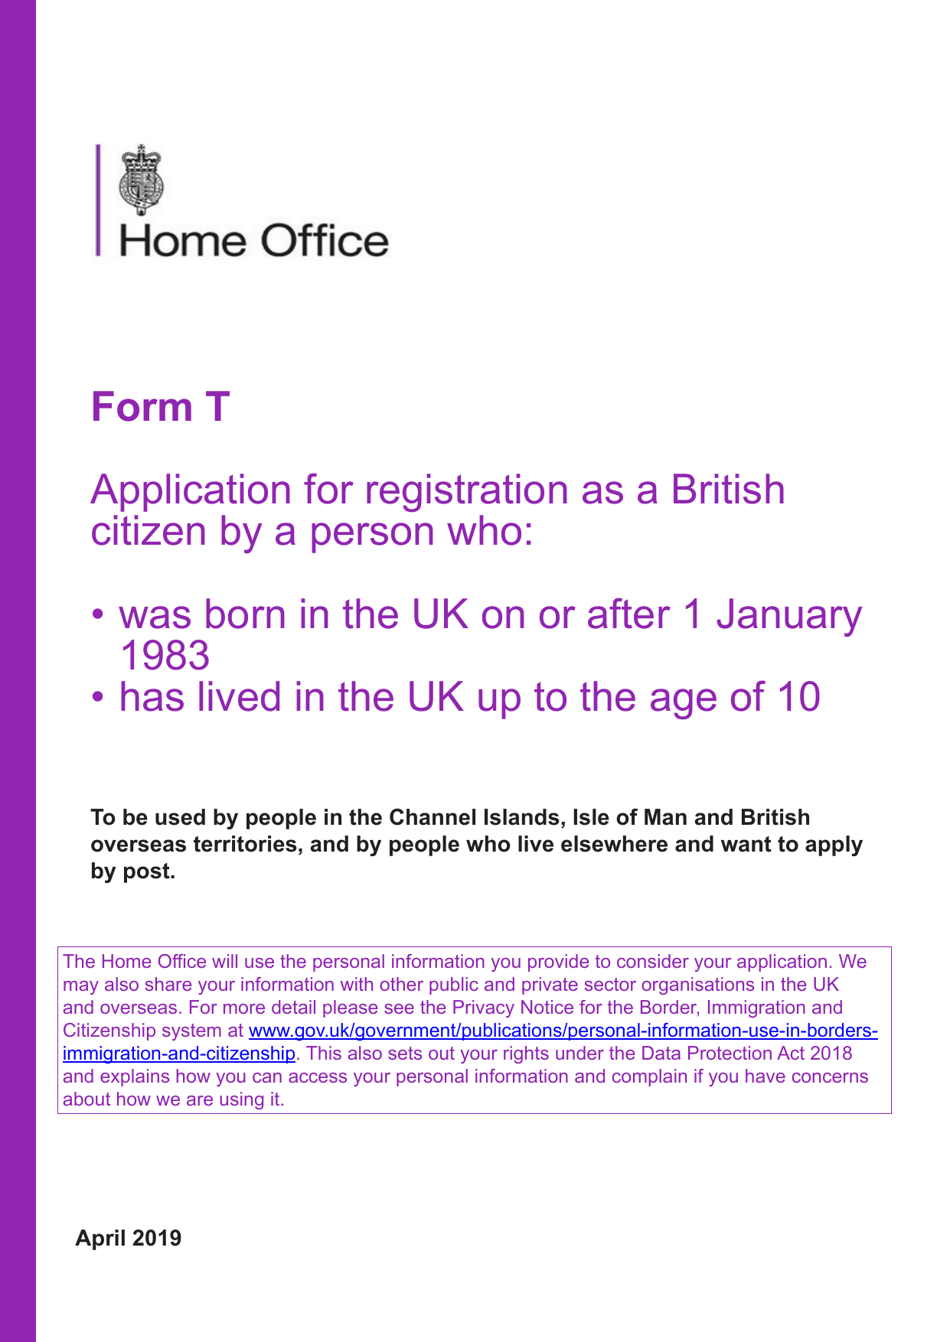 Form T Application for Registration as a British Citizen by a Person Who: Was Born in the UK on or After 1 January 1983/Has Lived in the UK up to the Age of 10 - United Kingdom, Page 1